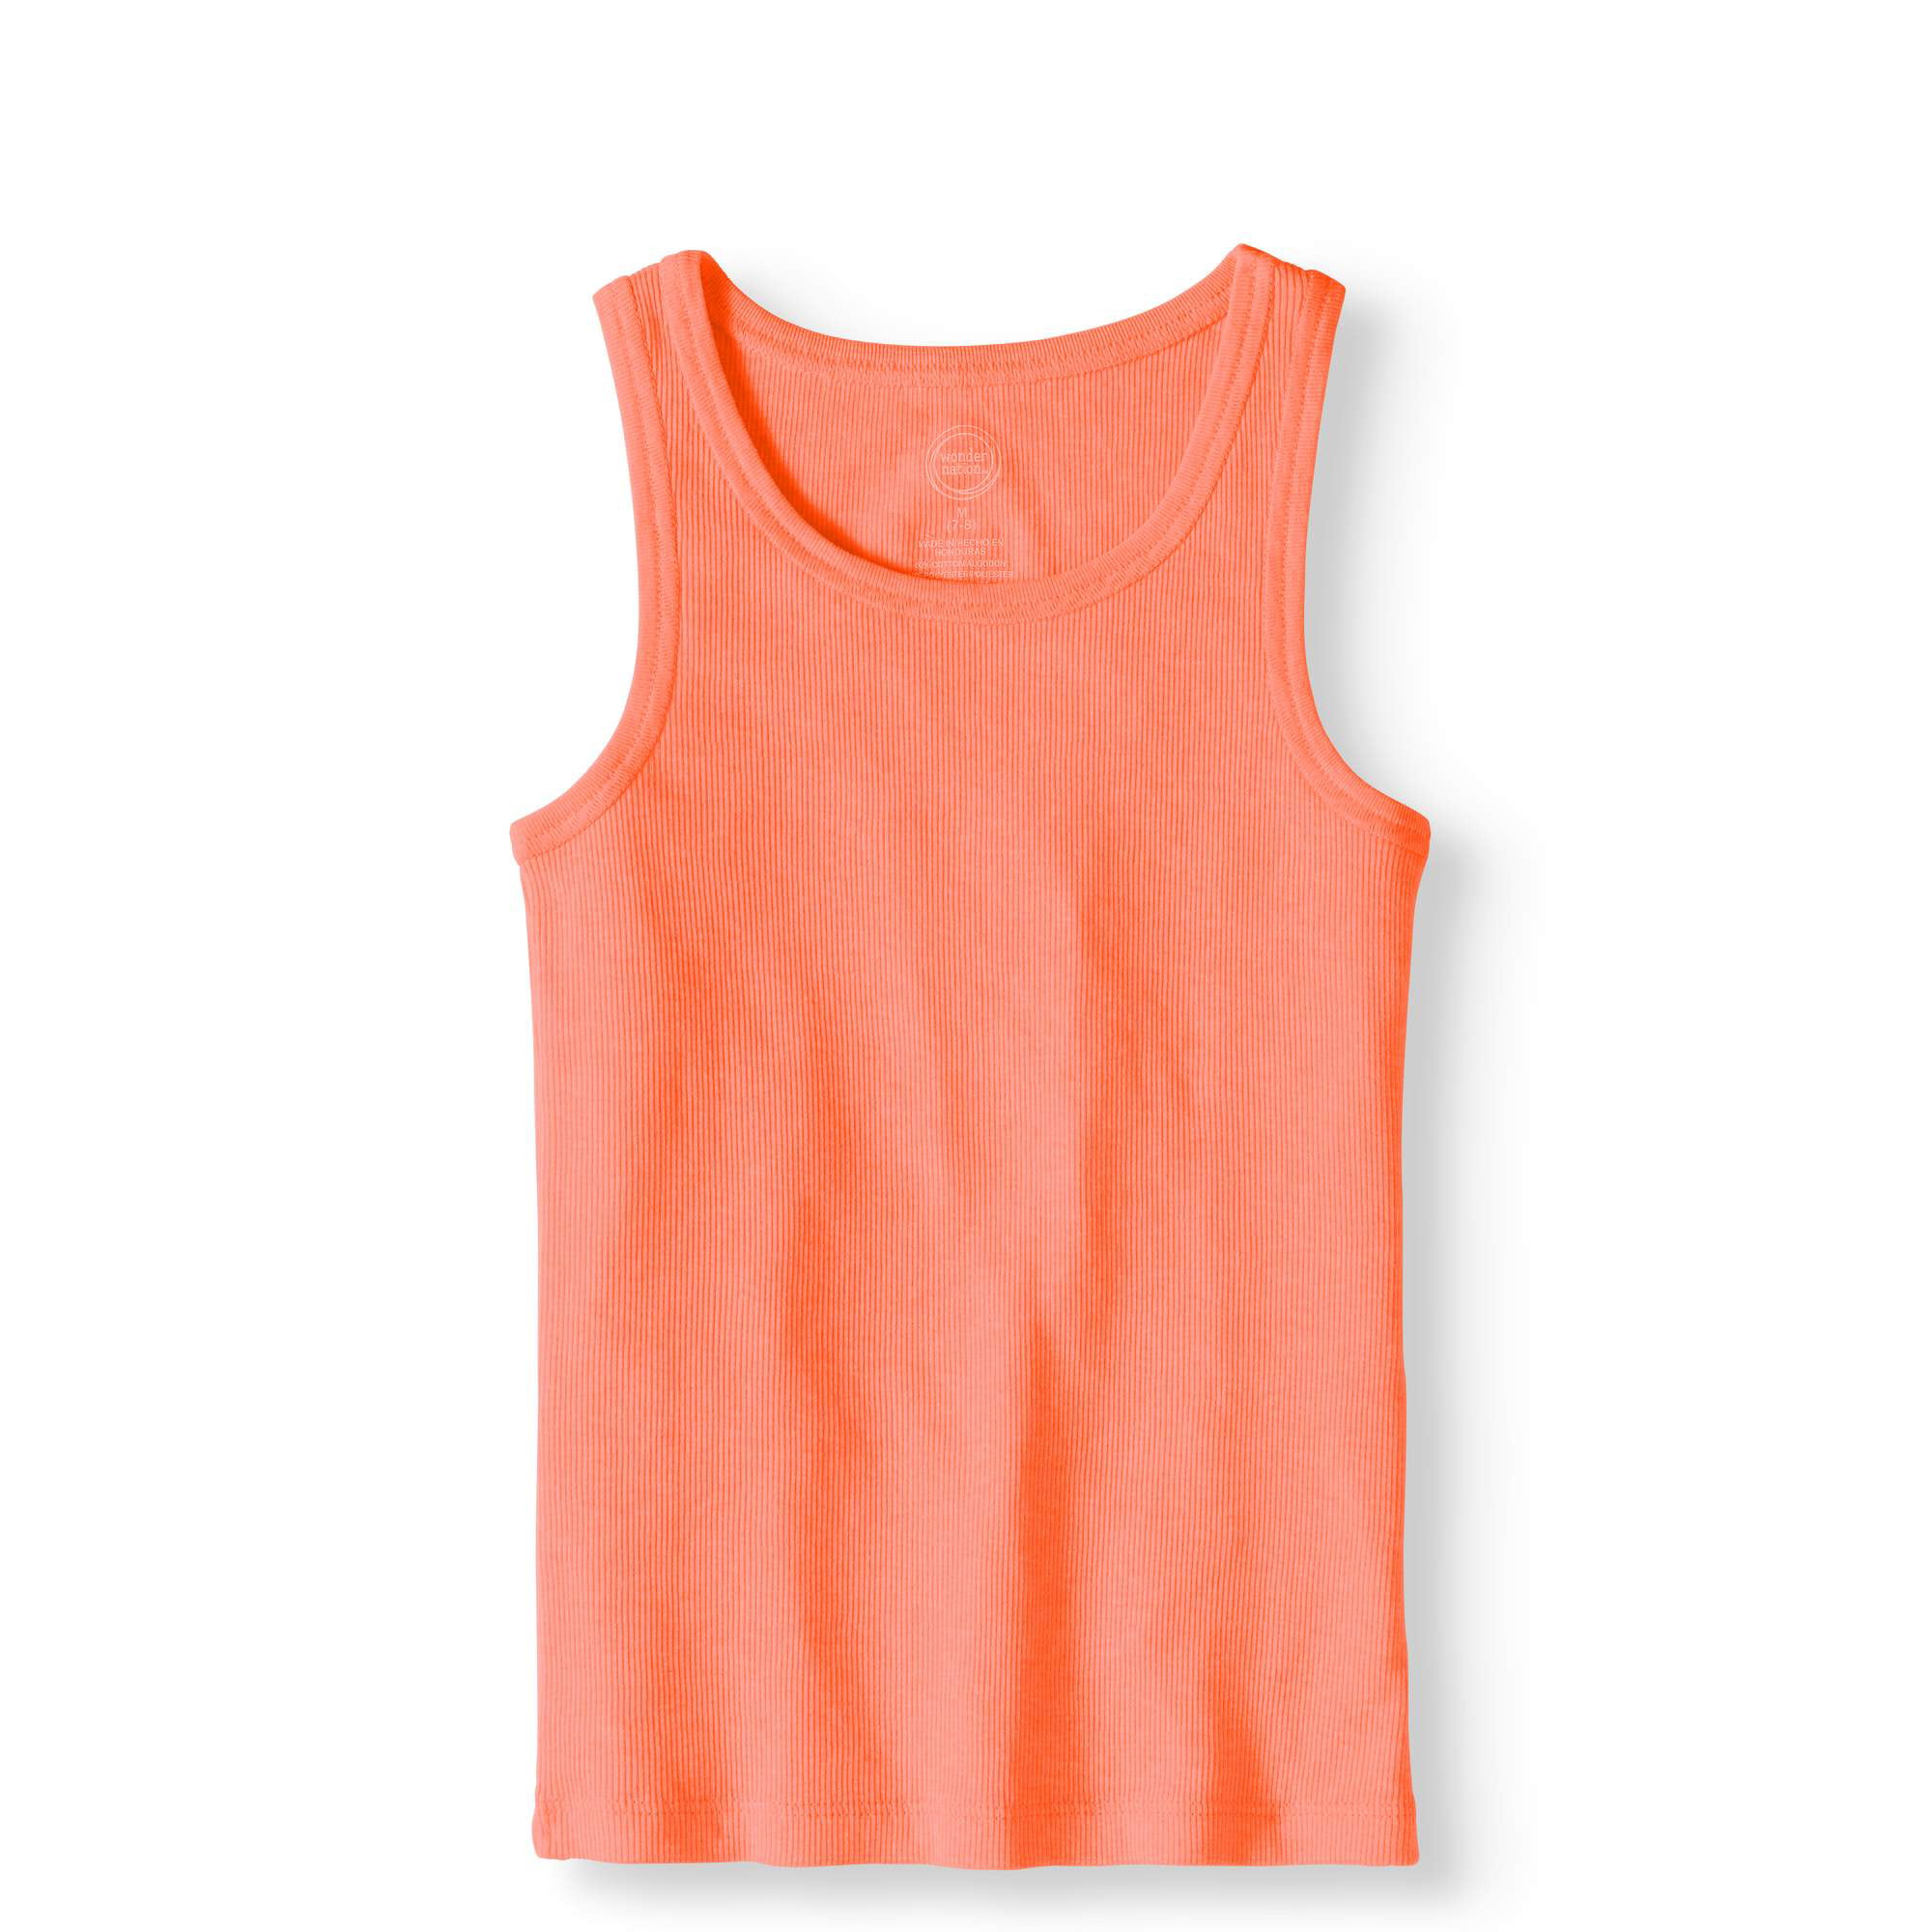 Boiiwant Kids Girls Solid Color Tank Tops Big Girl Comfortable